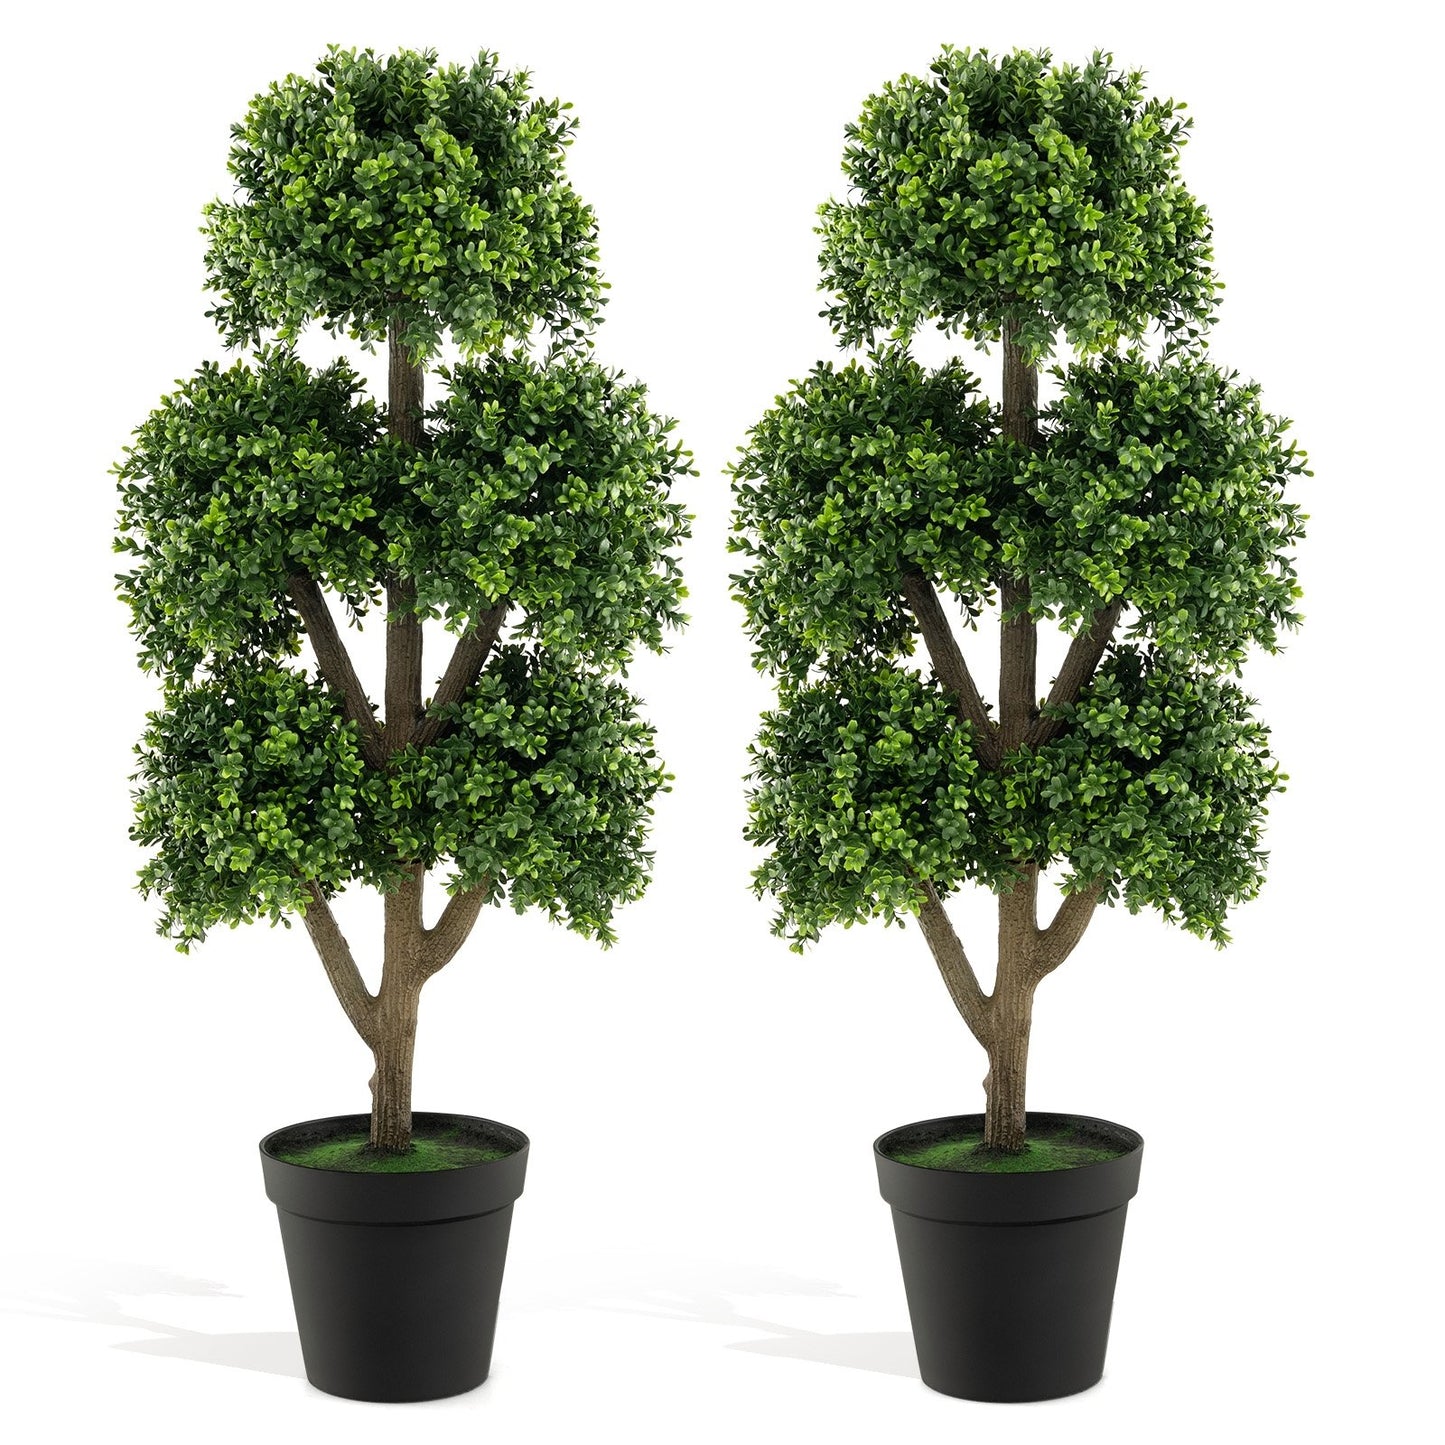 45 Inch Artificial Boxwood Topiary Ball Tree